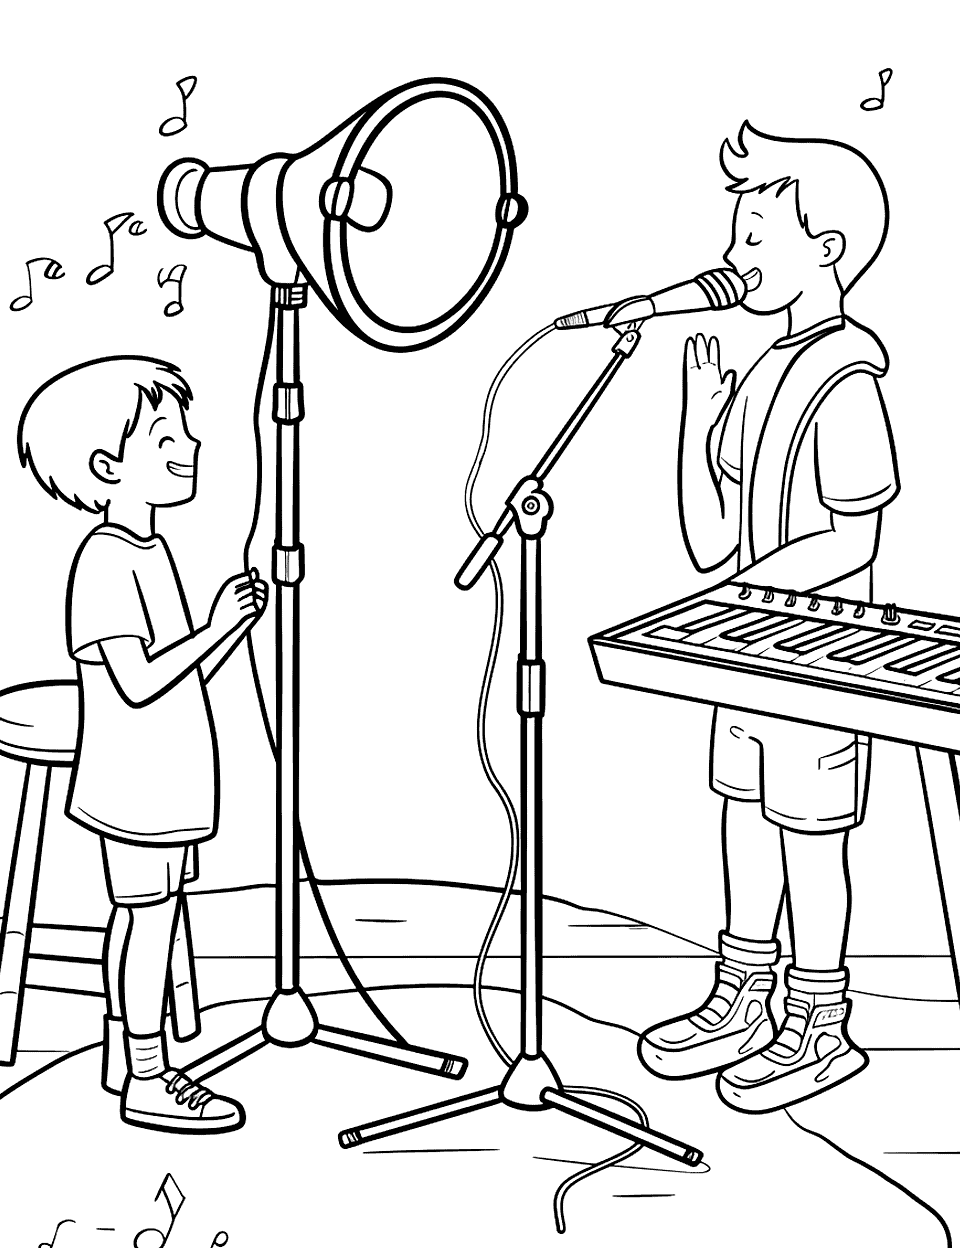 Singing Lesson in the Studio Music Coloring Page - A vocal coach teaching a child how to sing in a modern music studio.